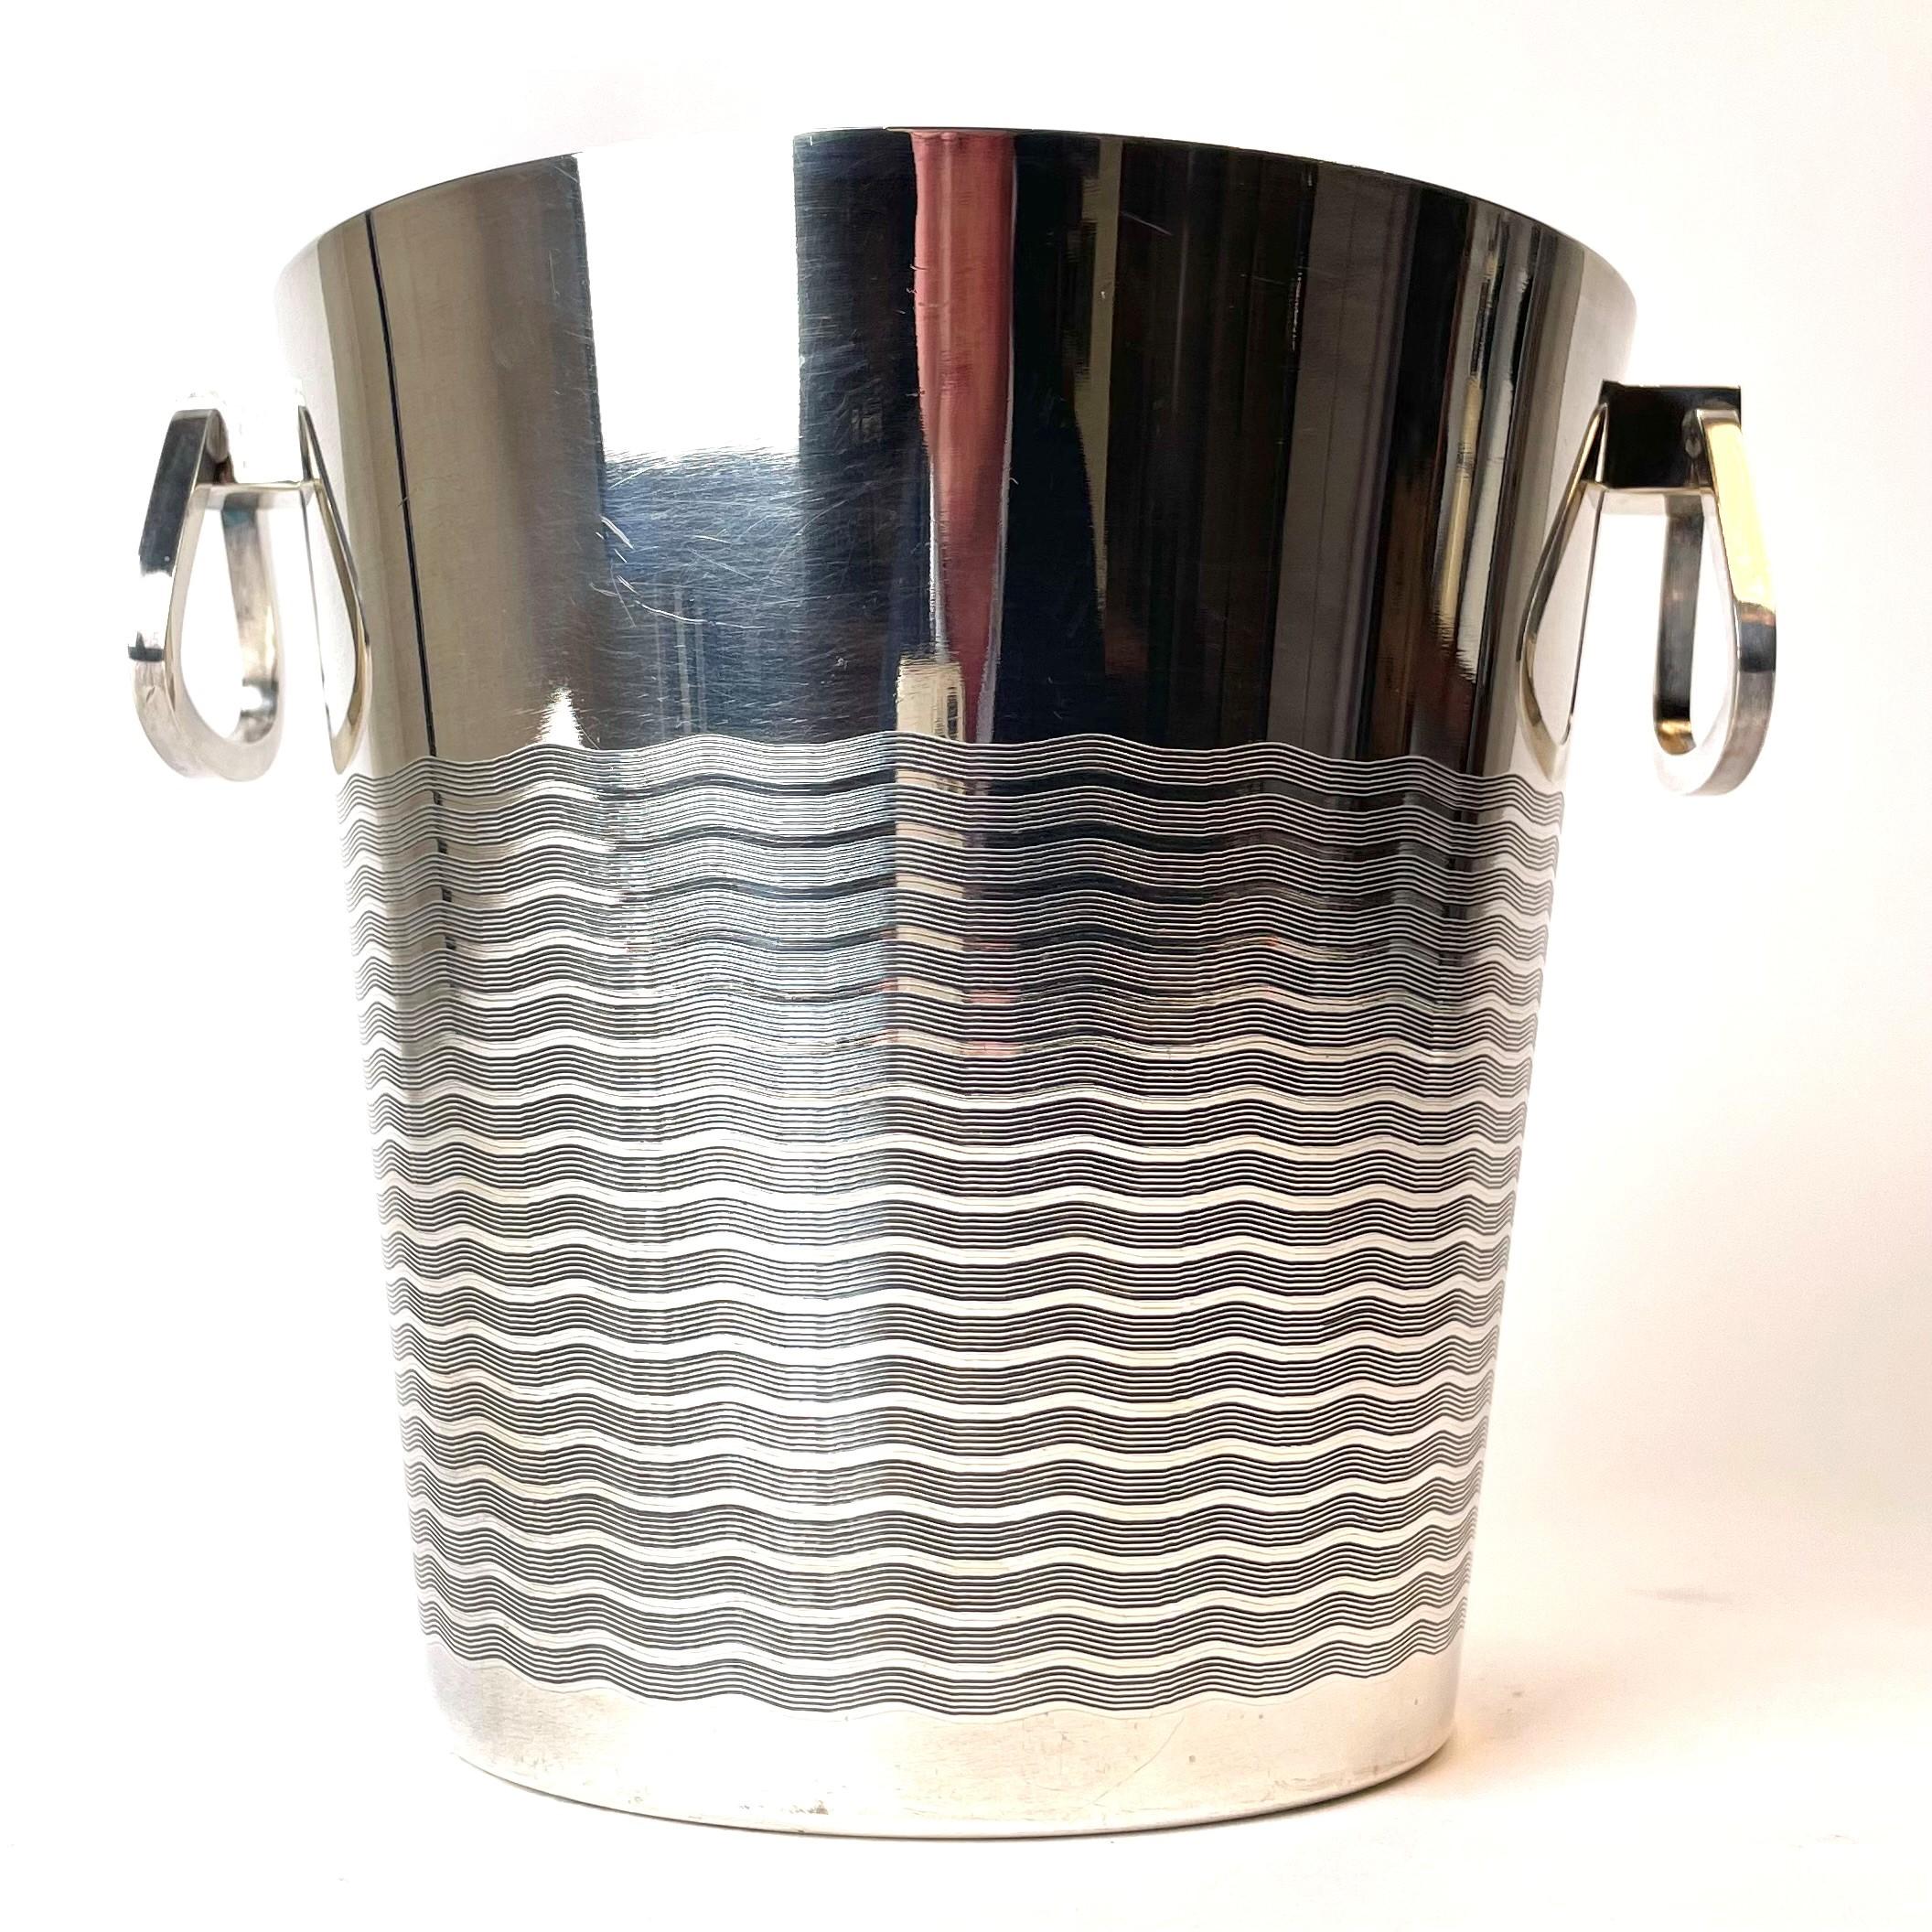 An elegant wine cooler with decor of waves from 1930s - 1940s. Made in silver plated brass in France.

The wine cooler is in good condition but has a little wear at the bottom (see picture) where the brass is visible.

Wear consistent with age